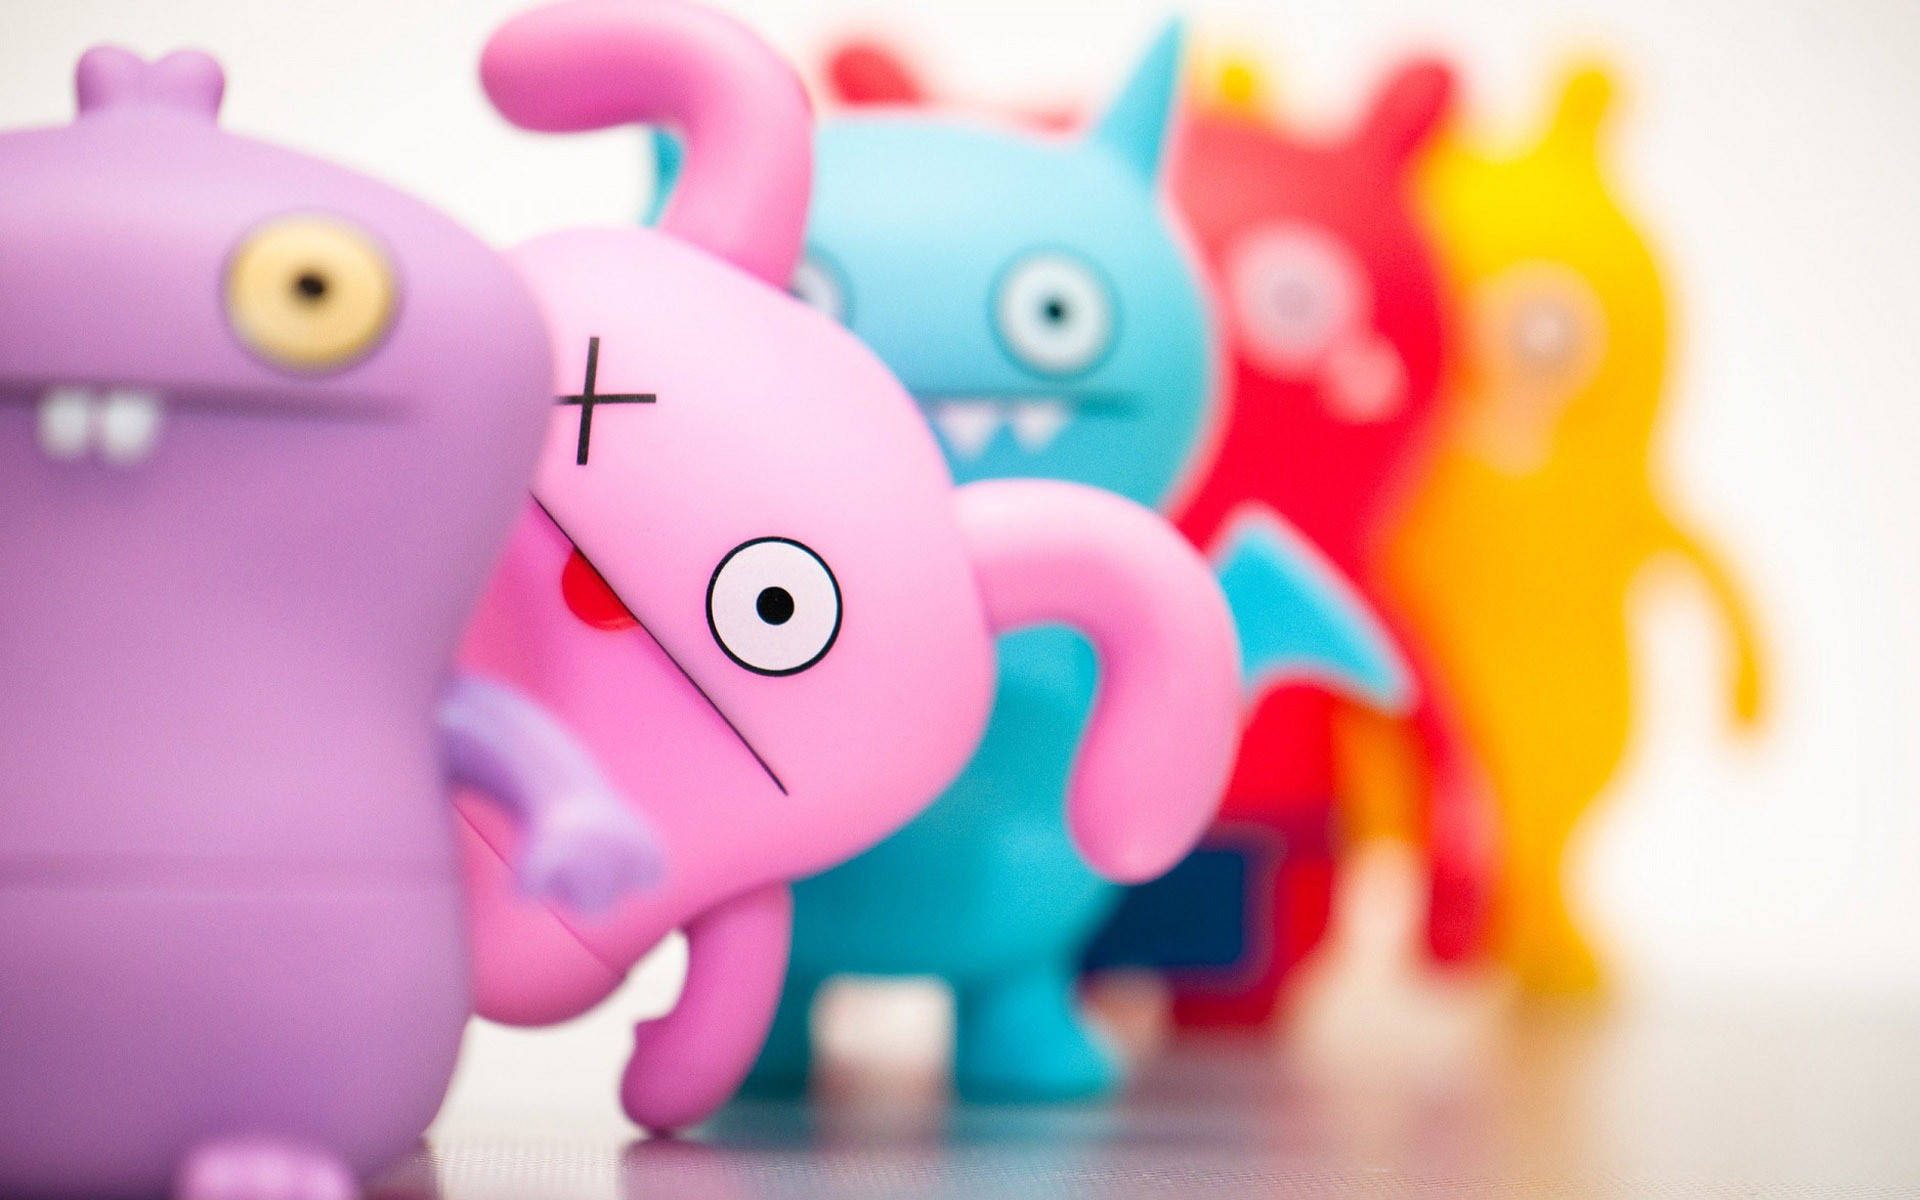 Cute Hd Image Of Ugly Dolls Background